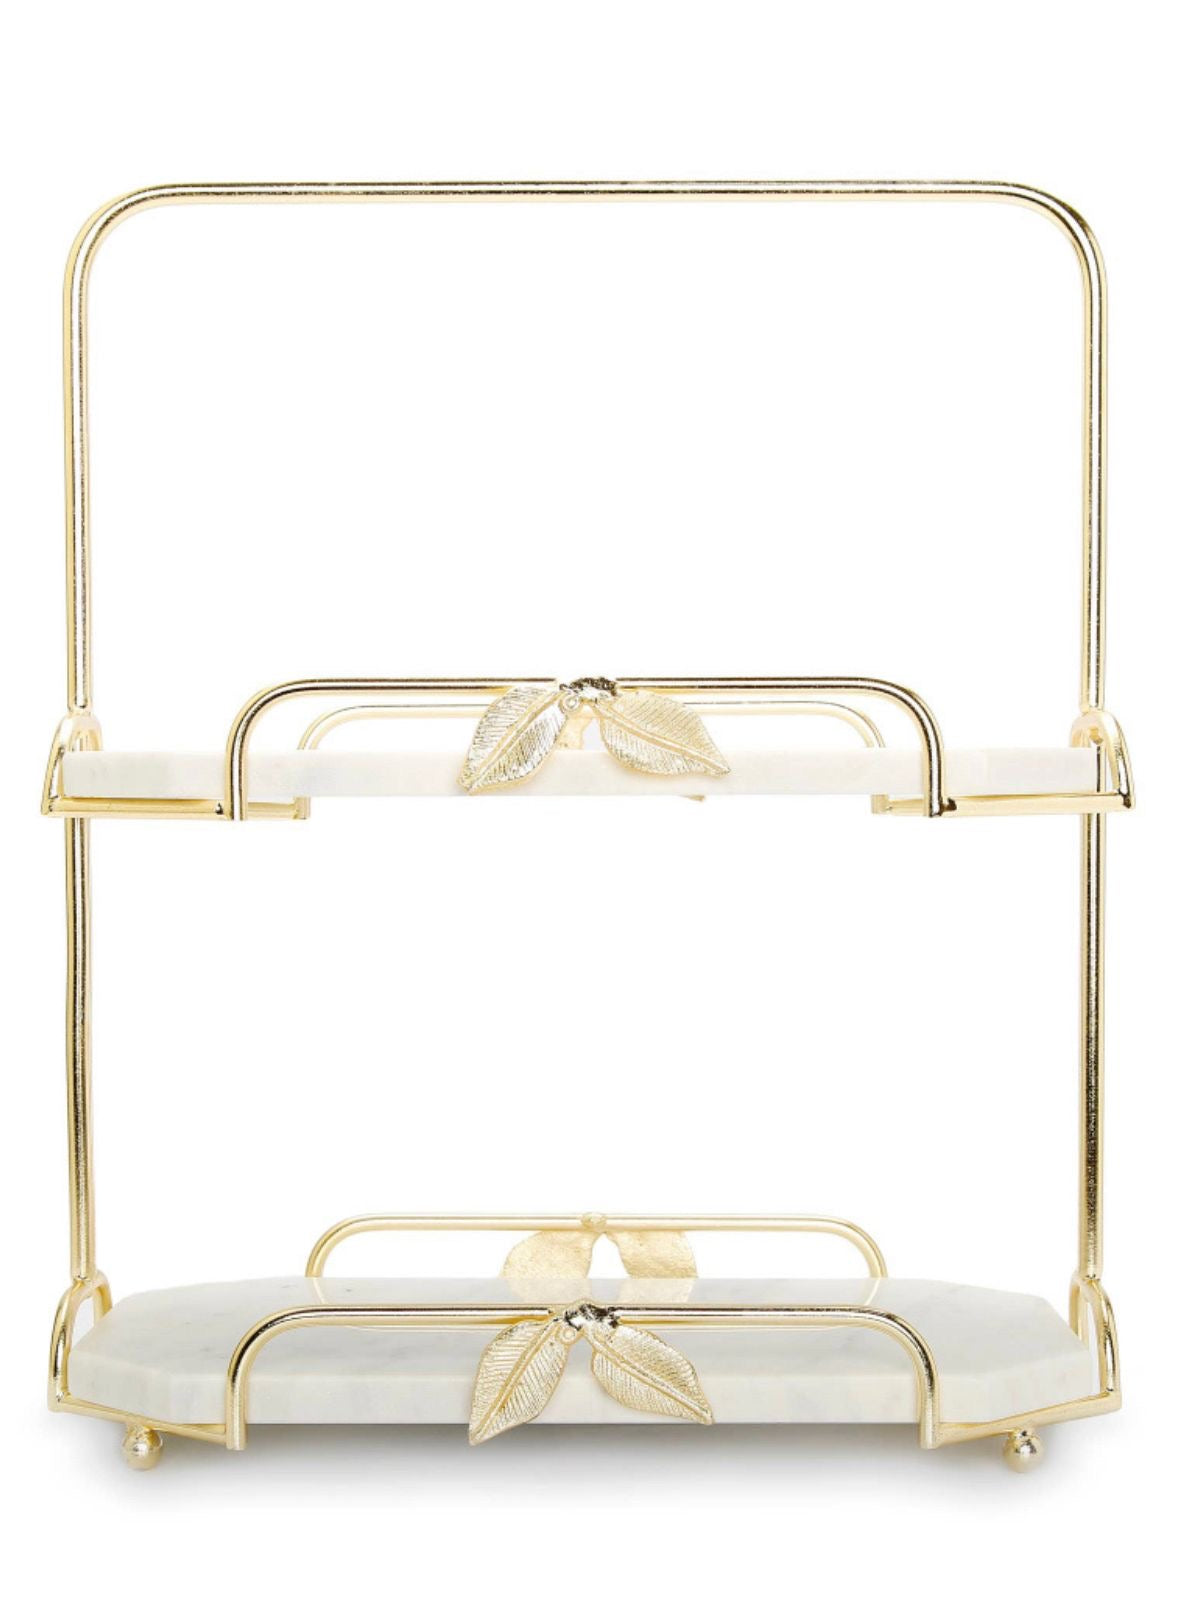 luxurious 2-tiered cake stand with marble trays on a gold leaf branch base.